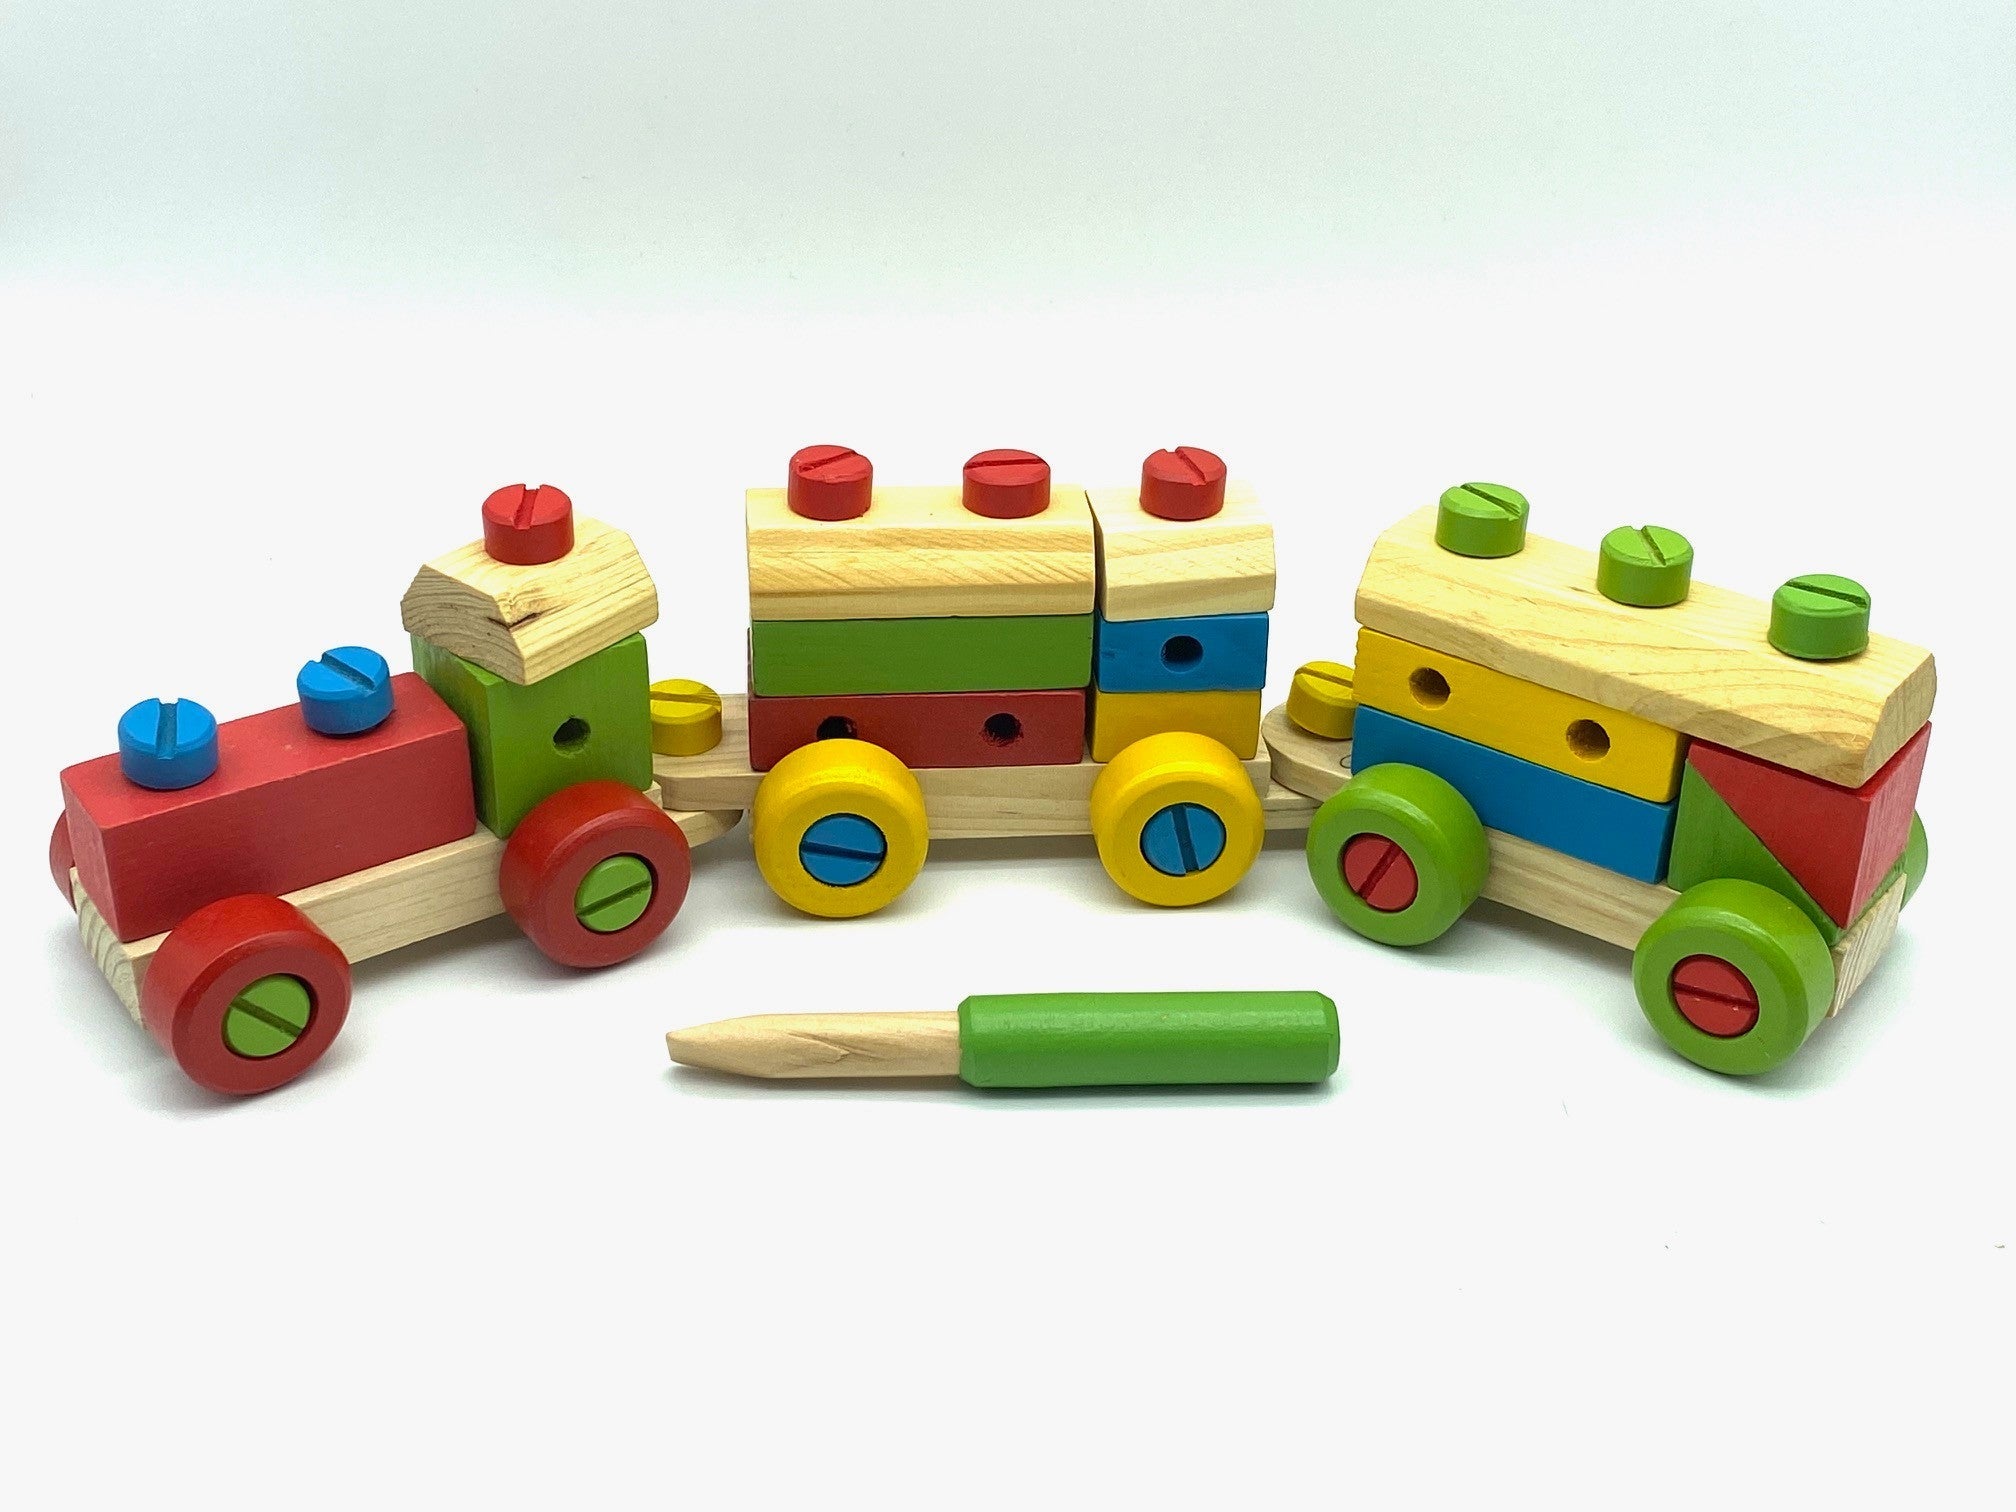 Wooden Train Nut Combination with Puzzle Shapes Stacking Train-52 pieces.